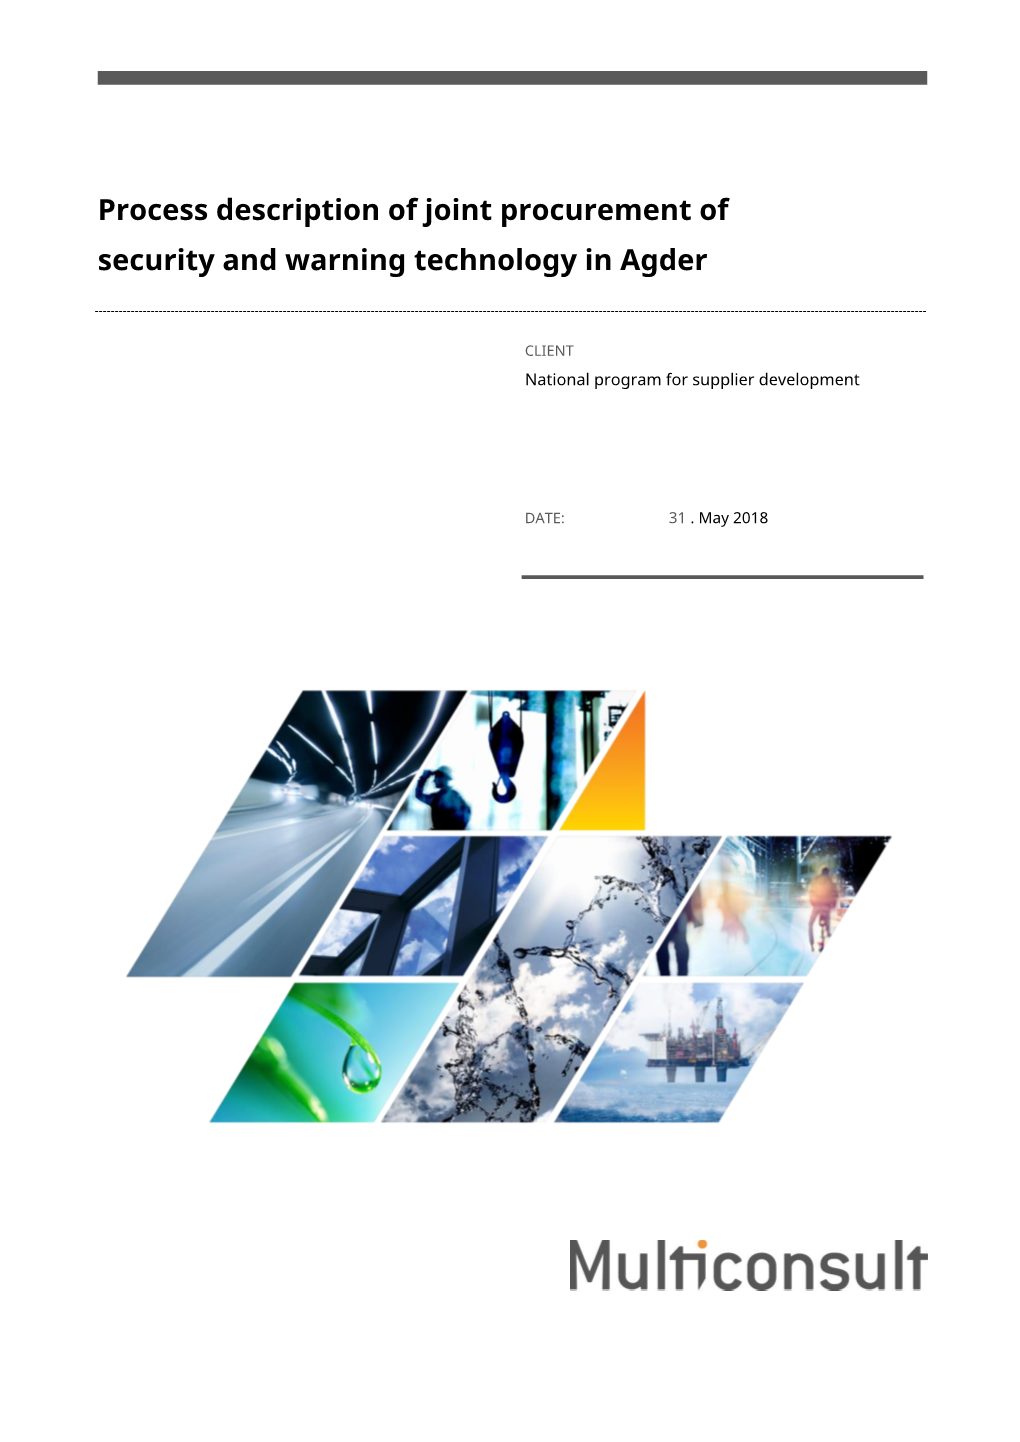 Process Description of Joint Procurement of Security and Warning Technology in Agder